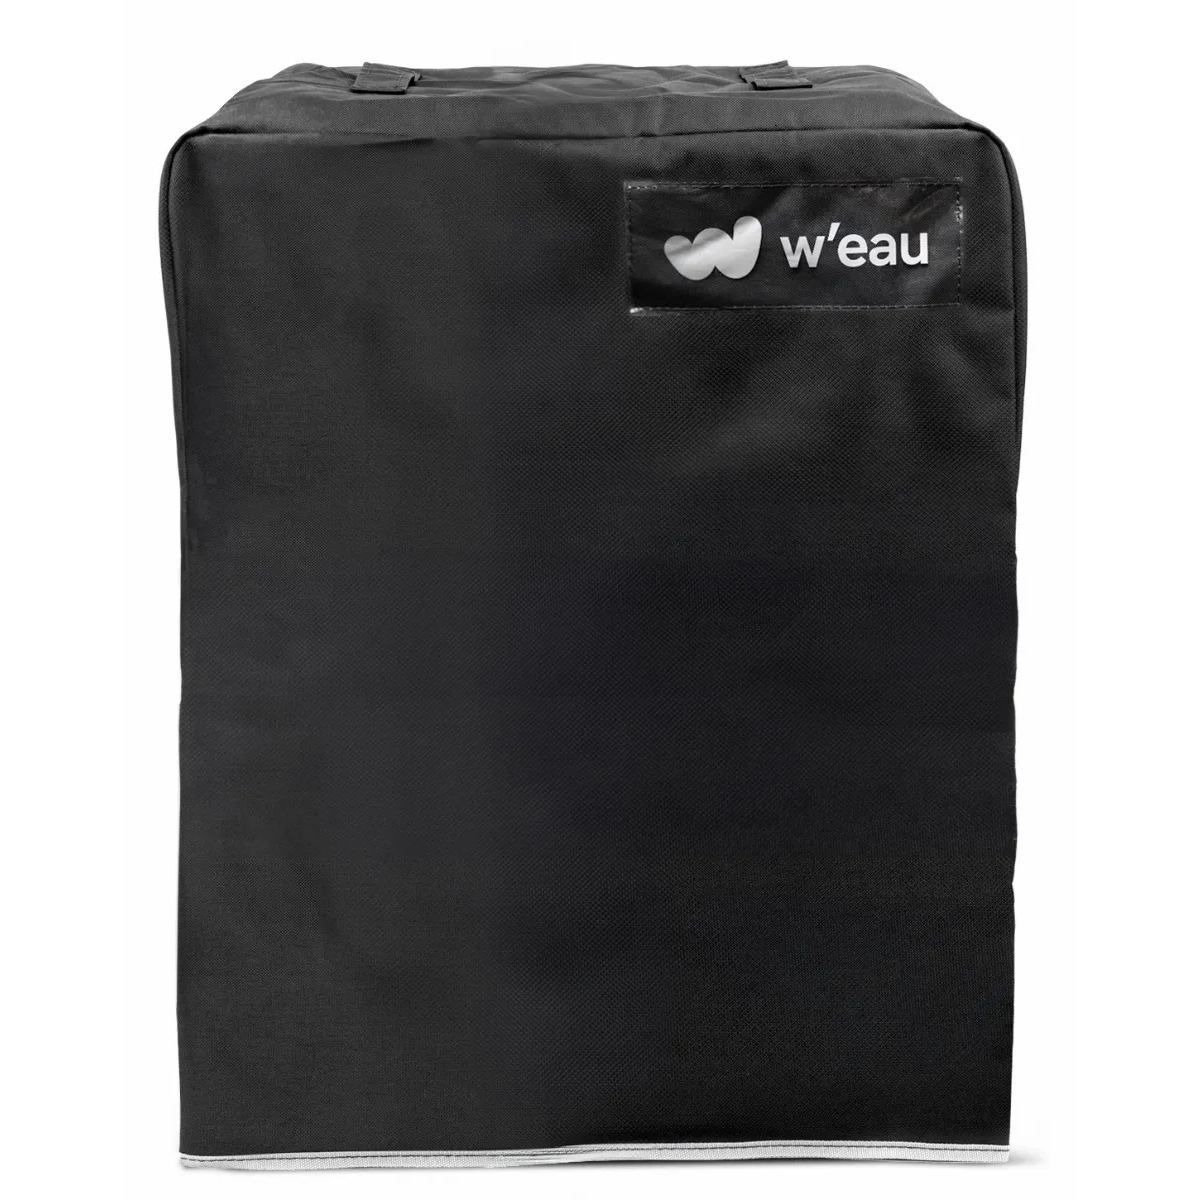 W'eau protective cover Vertical Full Inverter 13 kW, 17 kW, 21 kW